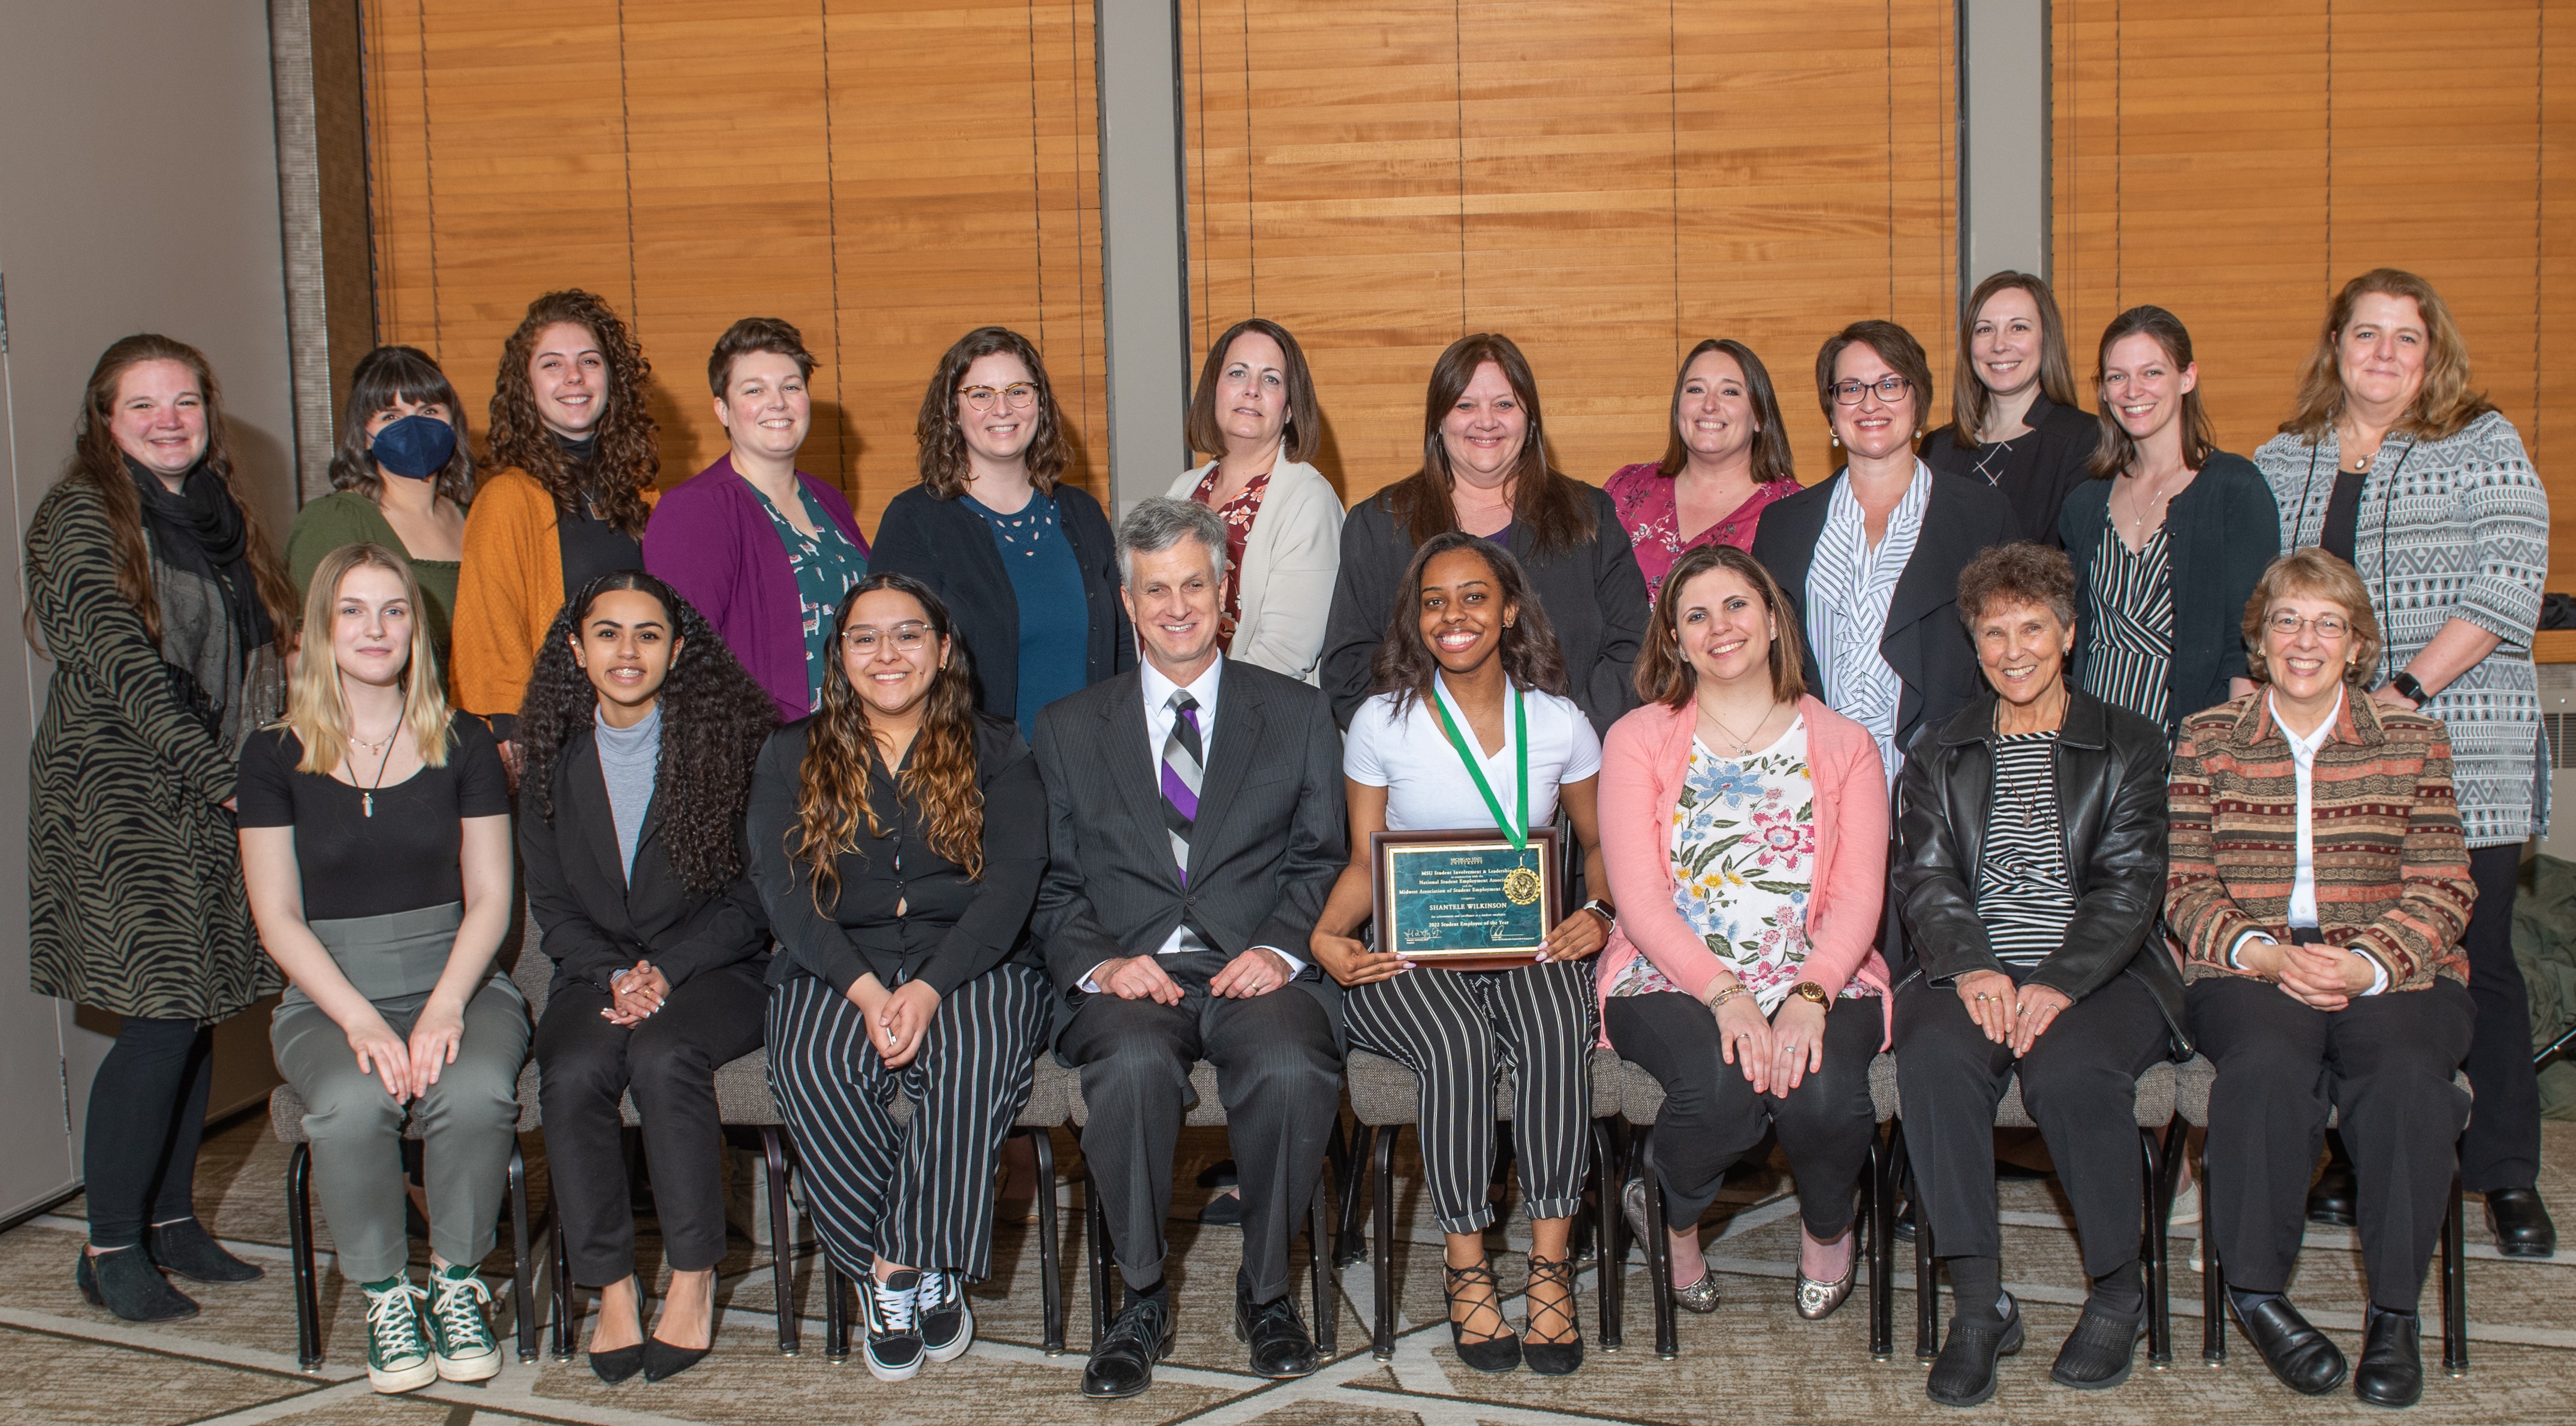 Staff Group Photo with Shantele Wilkinson holding Student Employee of the Year Award in the middle